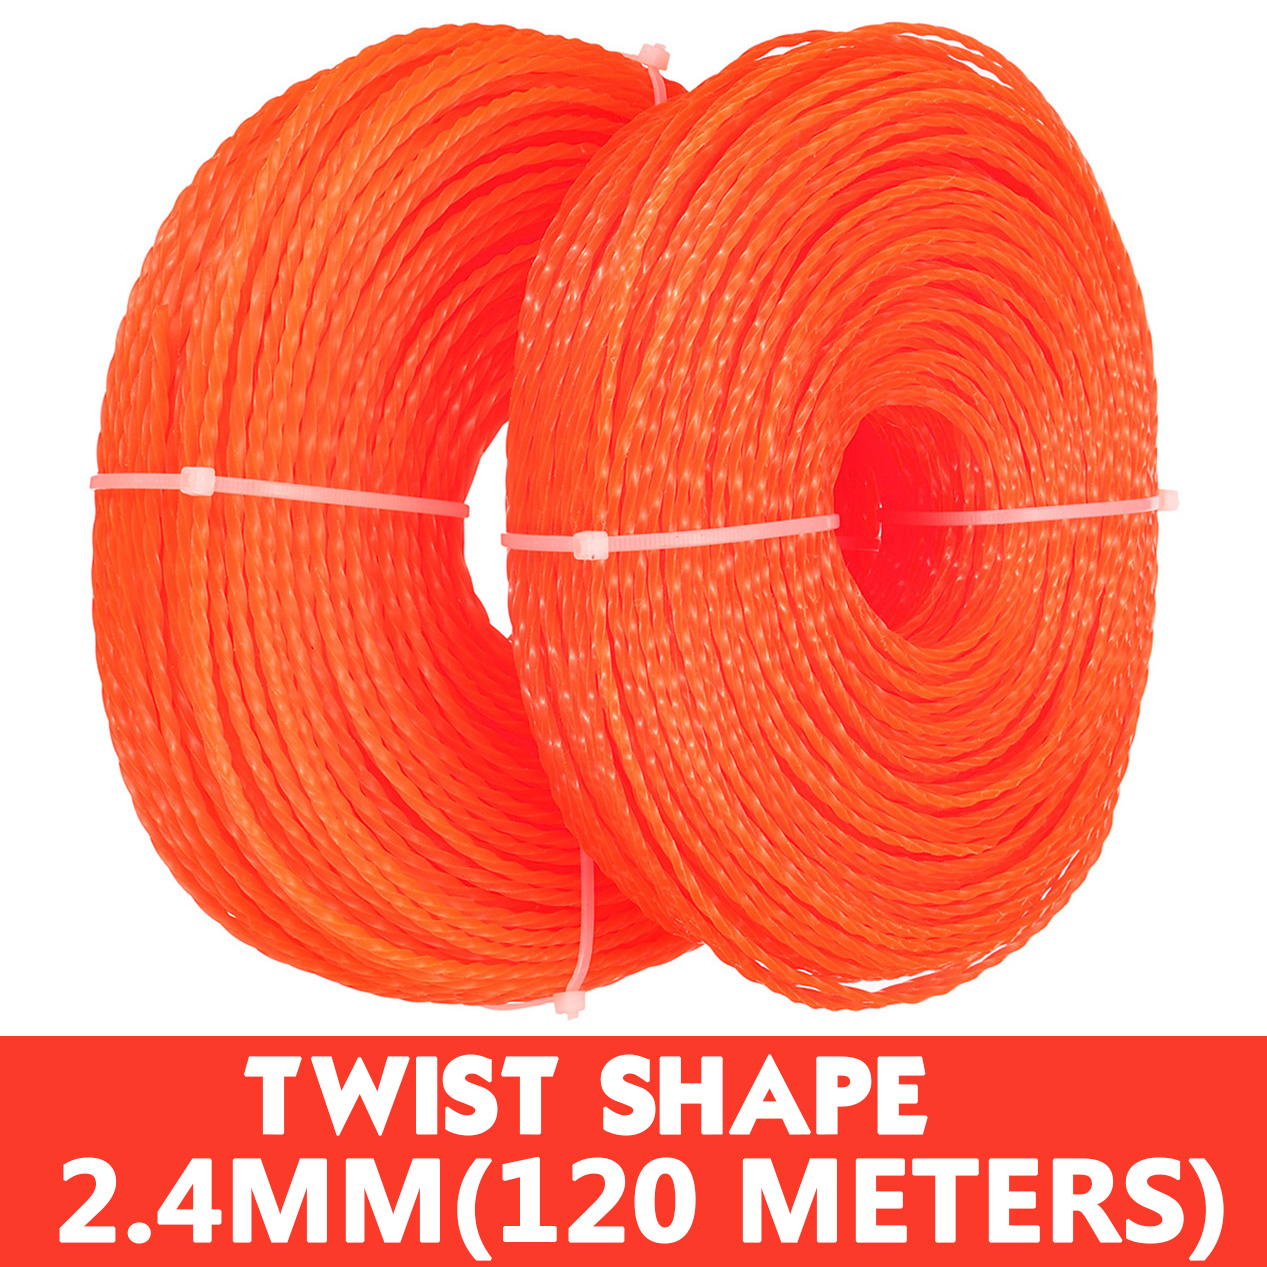 242730-mm-Commercial-Spiral-Twist-Trimmer-Line-Whipper-Snipper-Cord-1790010-4